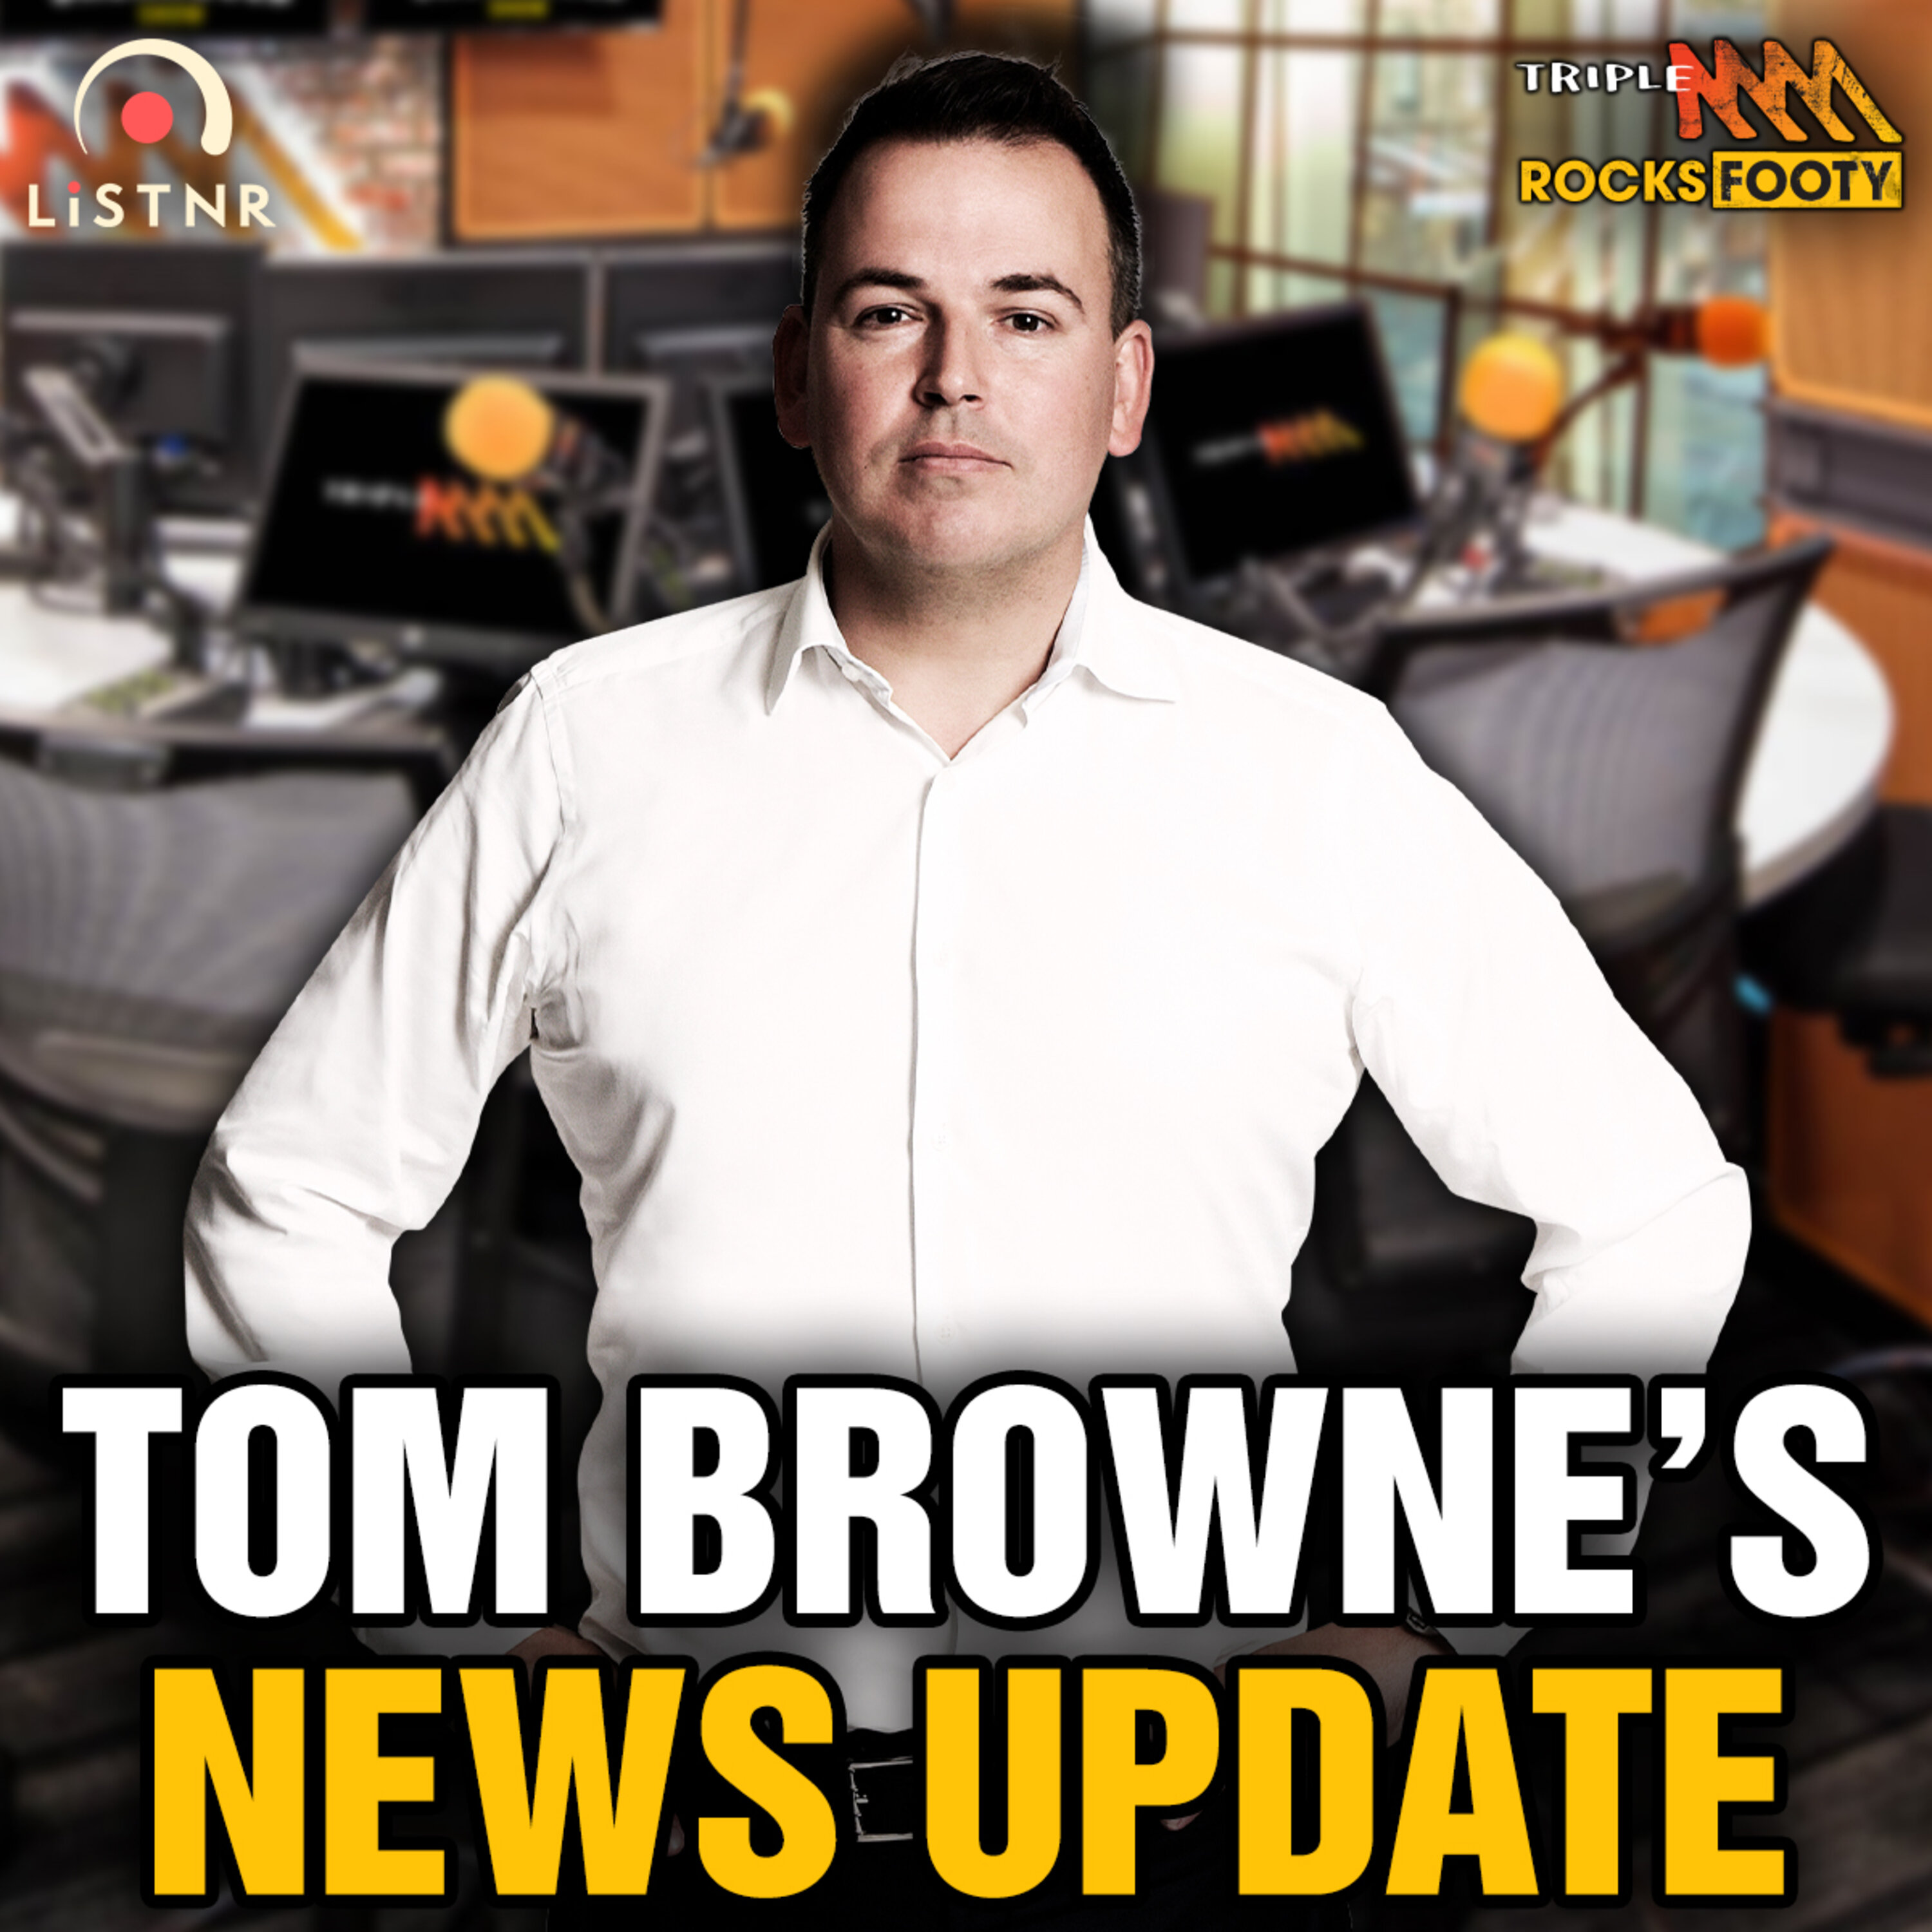 Tom Browne's News | Dimma lands on the Gold Coast, how hot is the heat on Luke Beveridge, score review shortcomings in focus